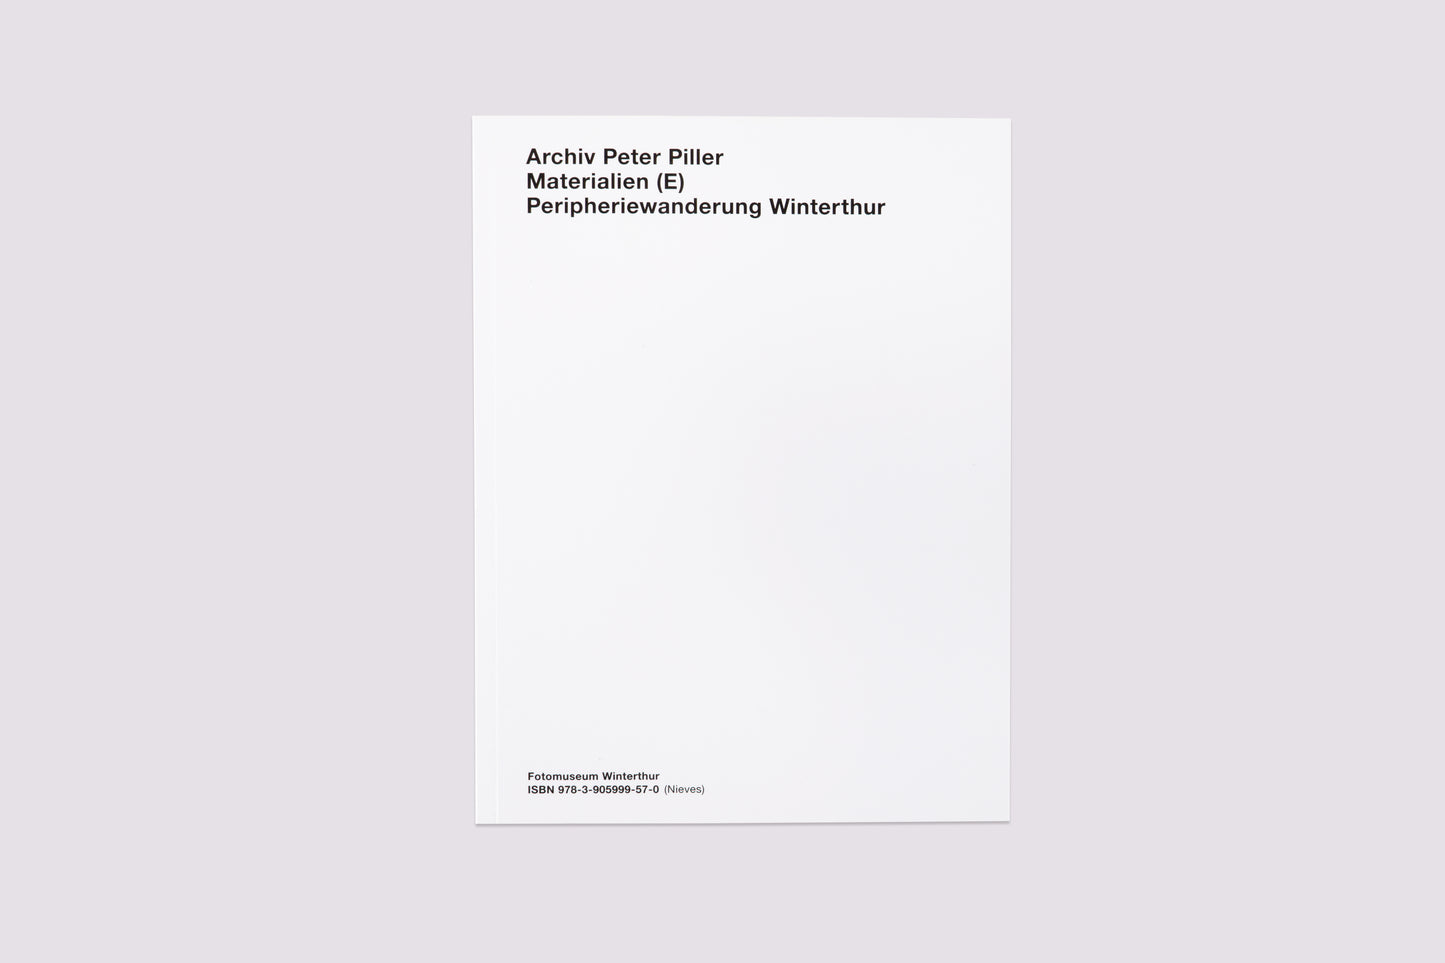 Materialien (E)/Peter Piller published by Nieves